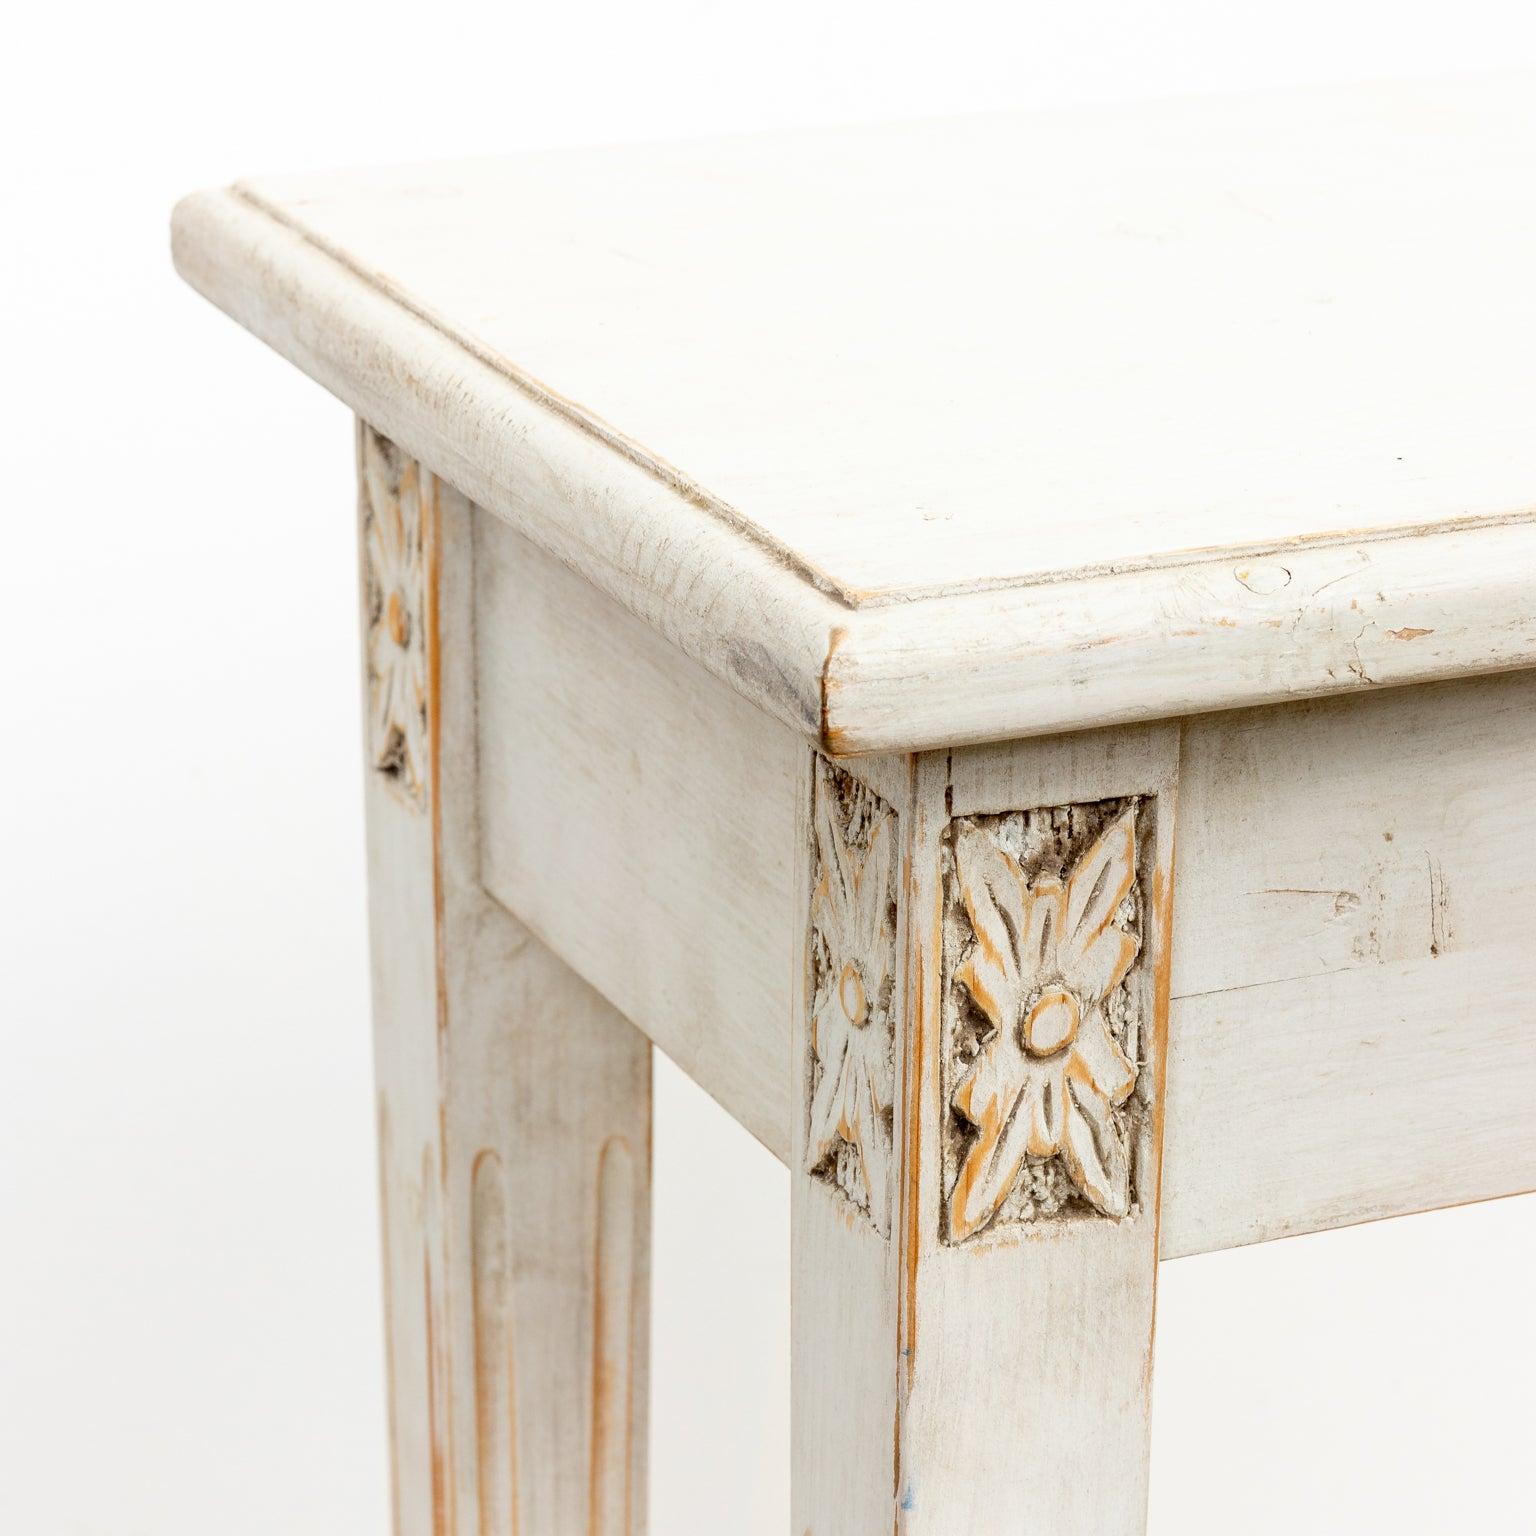 A vintage Gustavian style/Swedish square occasional table with lovely carved wood accents painted in a chalky milk paint. Wear consistent with age.